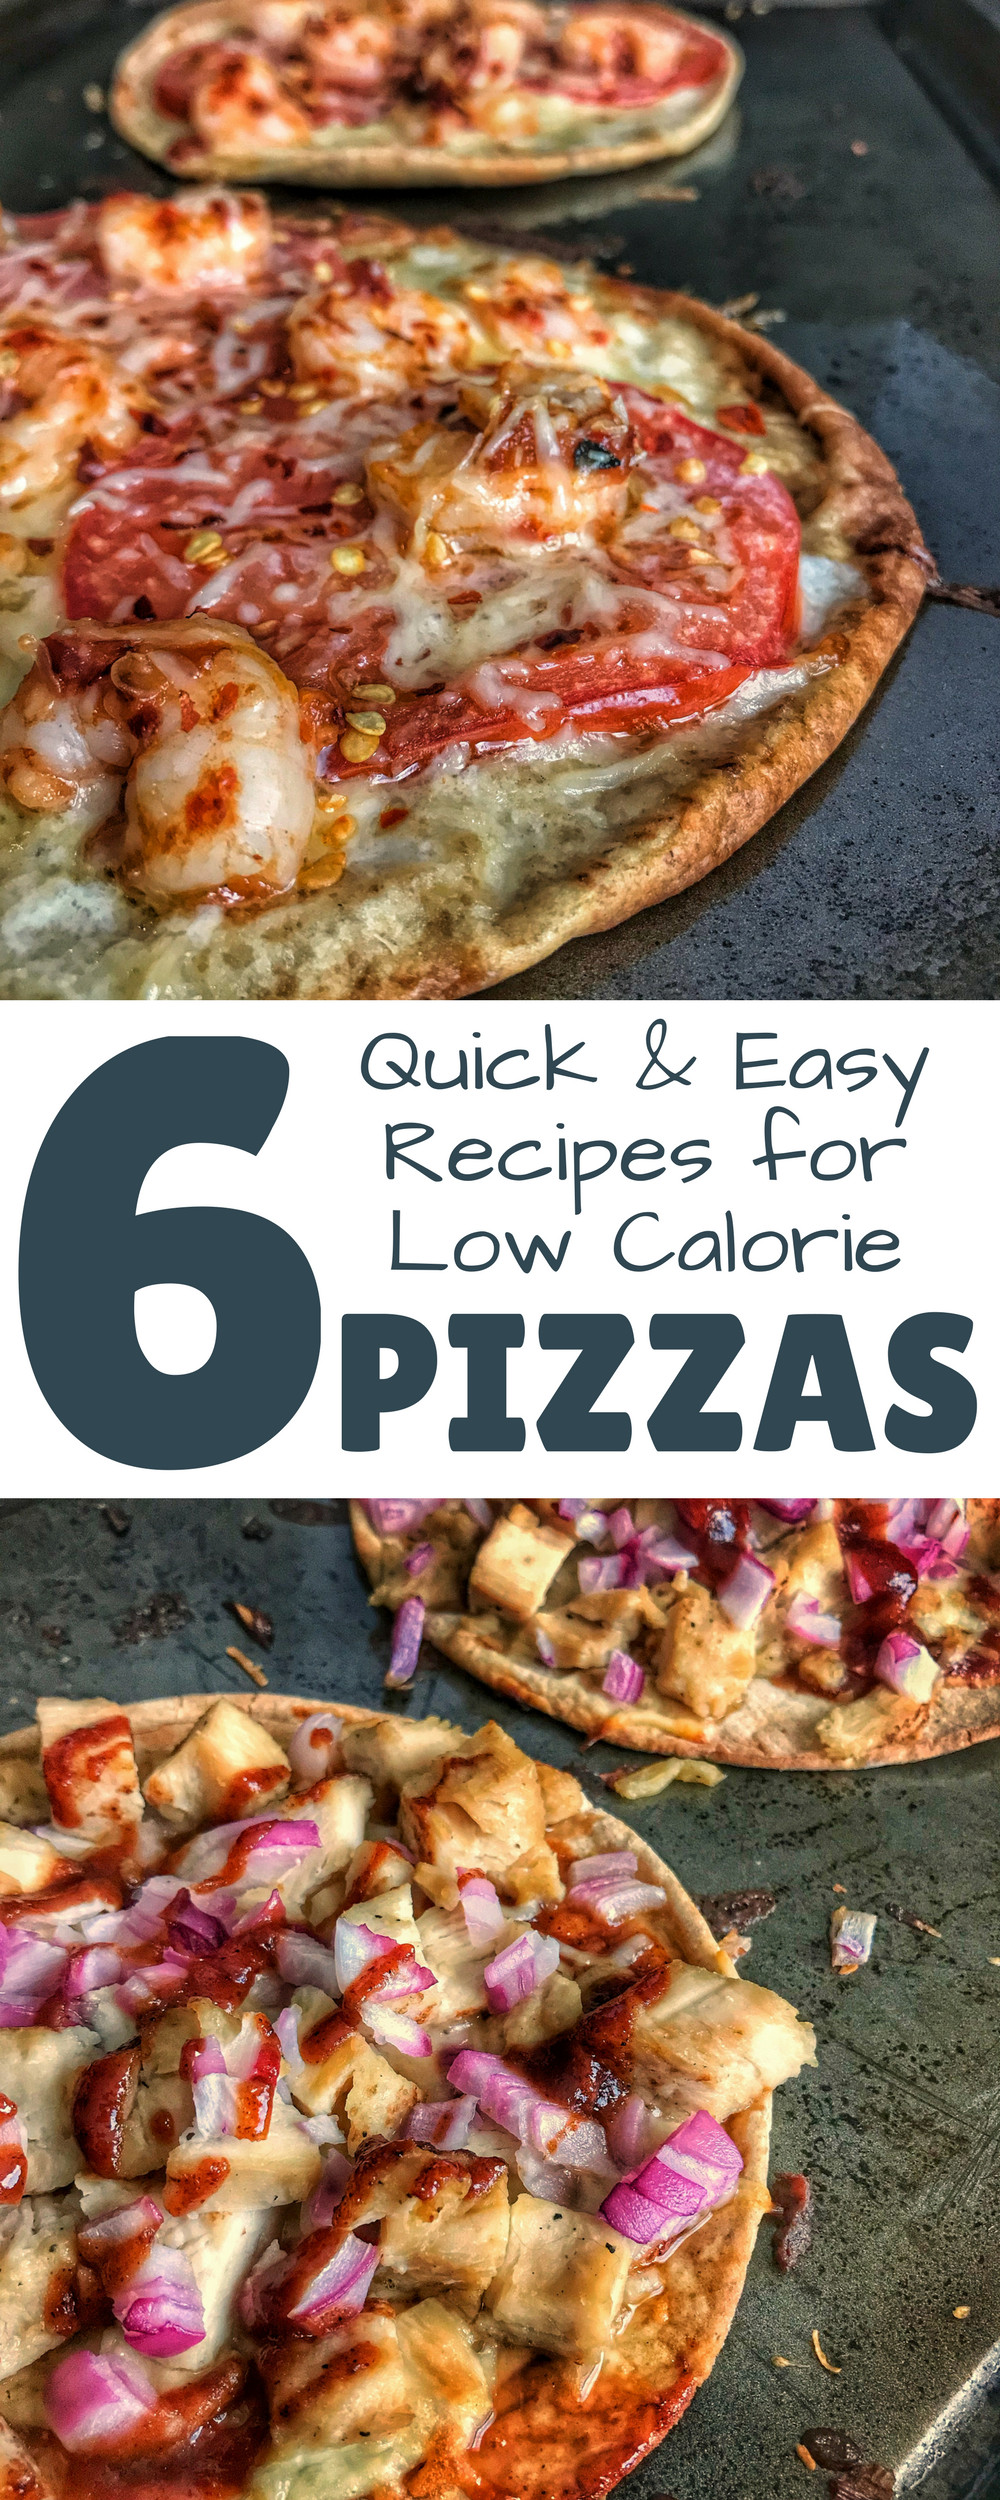 Low Calorie Pizza Dough Recipe
 Six low calorie pizza recipes ranging from spicy shrimp